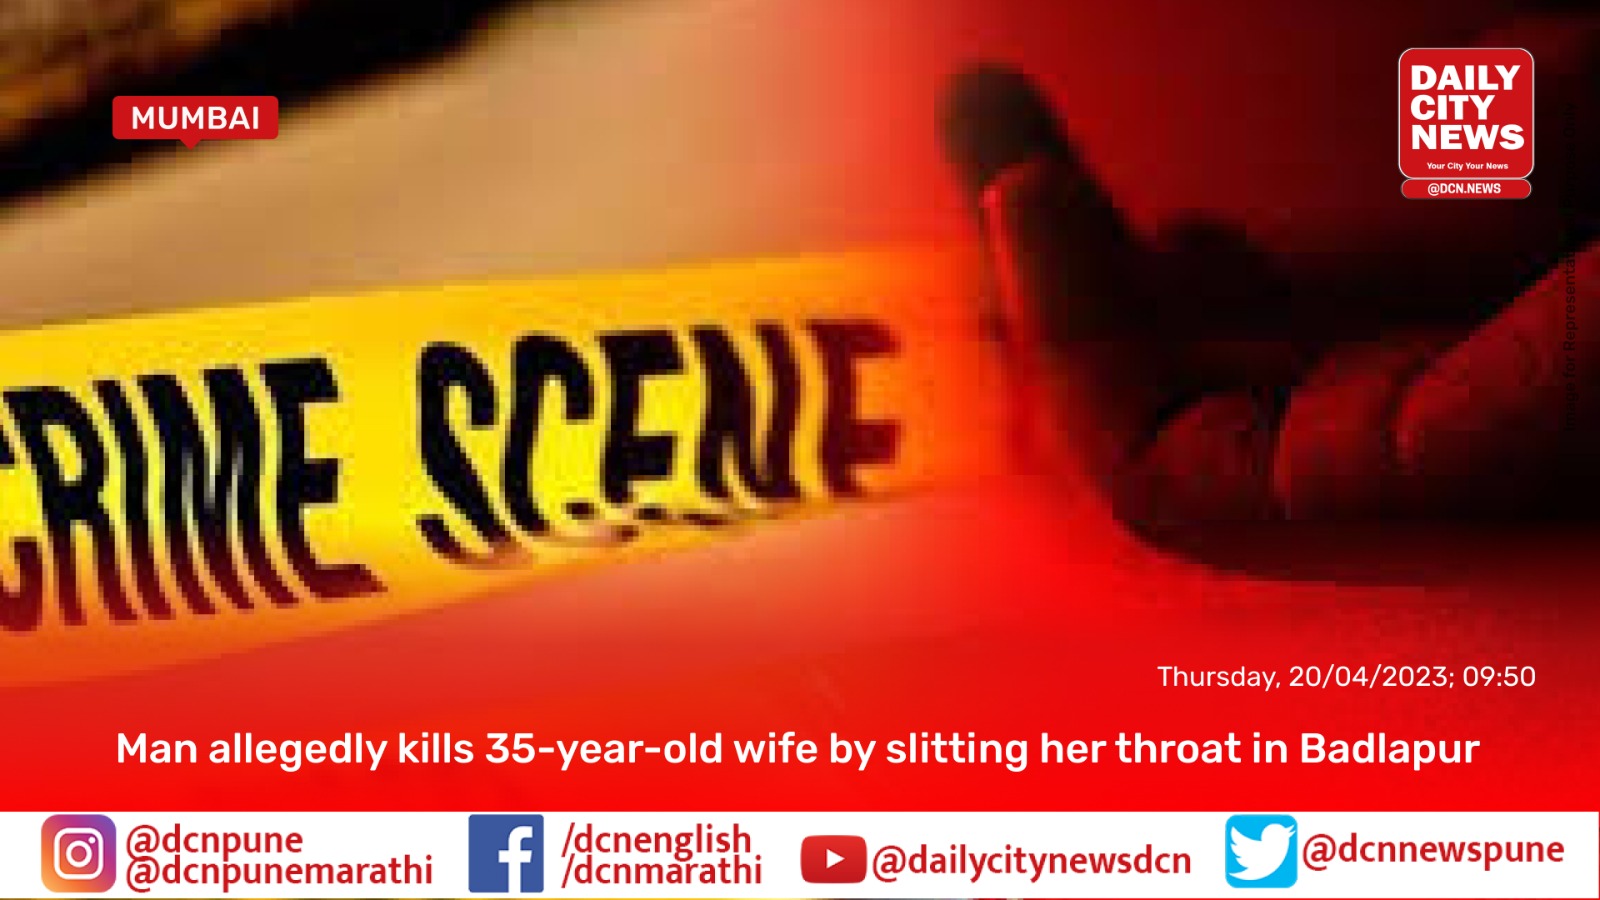 Man allegedly kills 35-year-old wife by slitting her throat in Badlapur